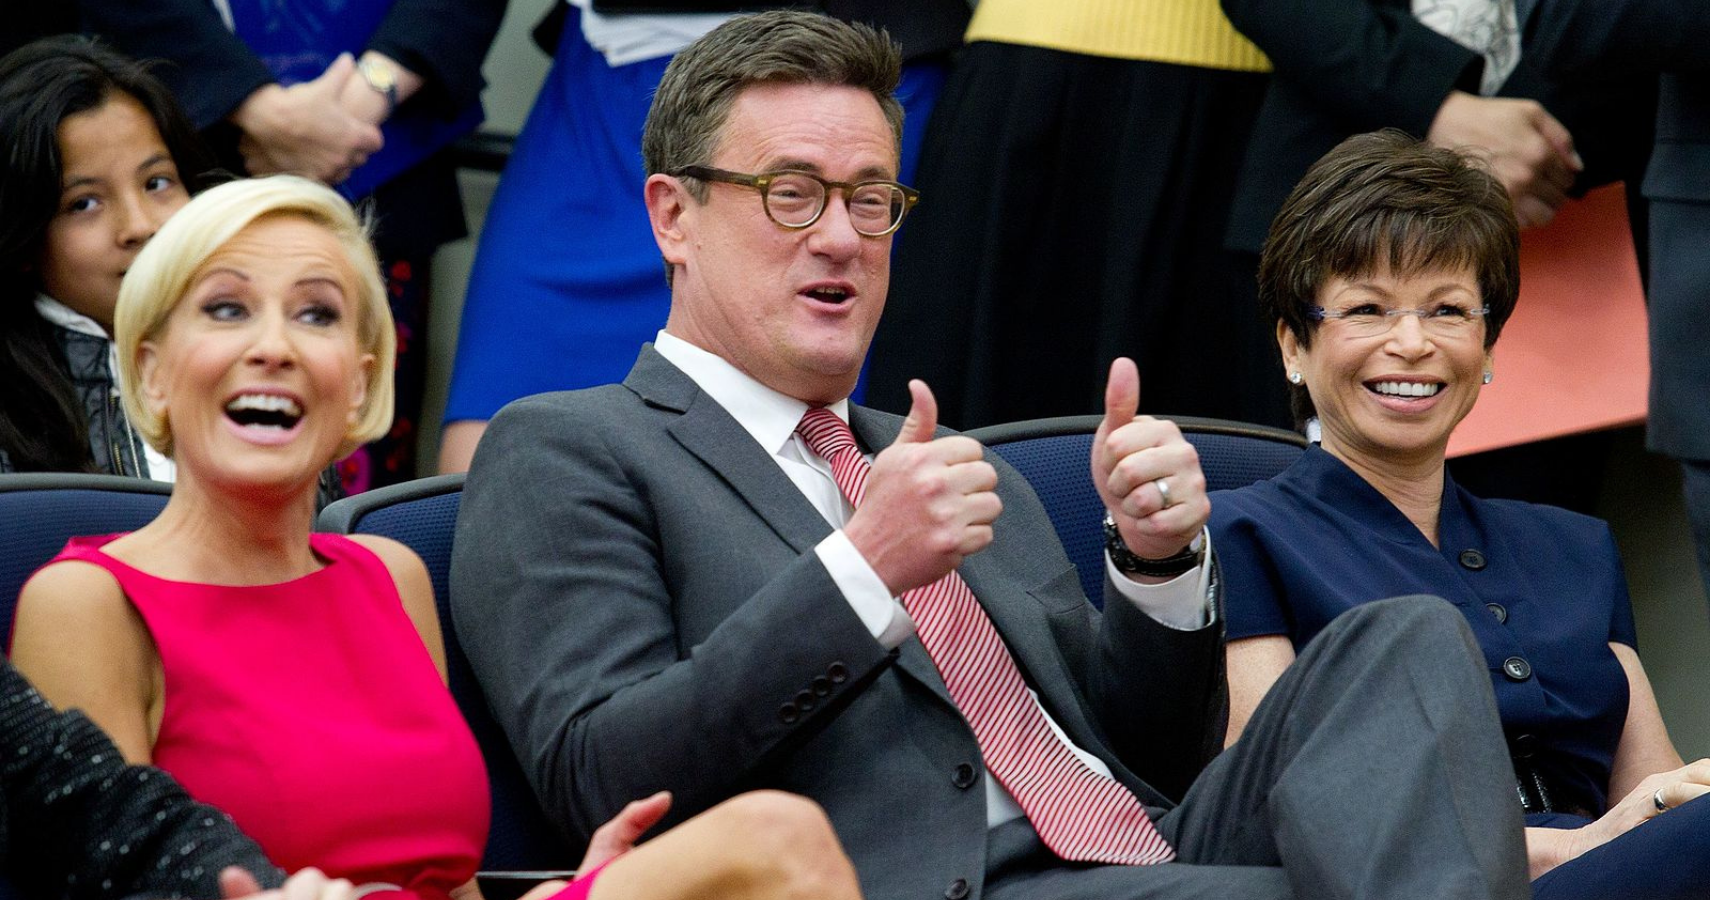 Morning Dough: Joe Scarborough's Salary And The Ways He Spends His Millions